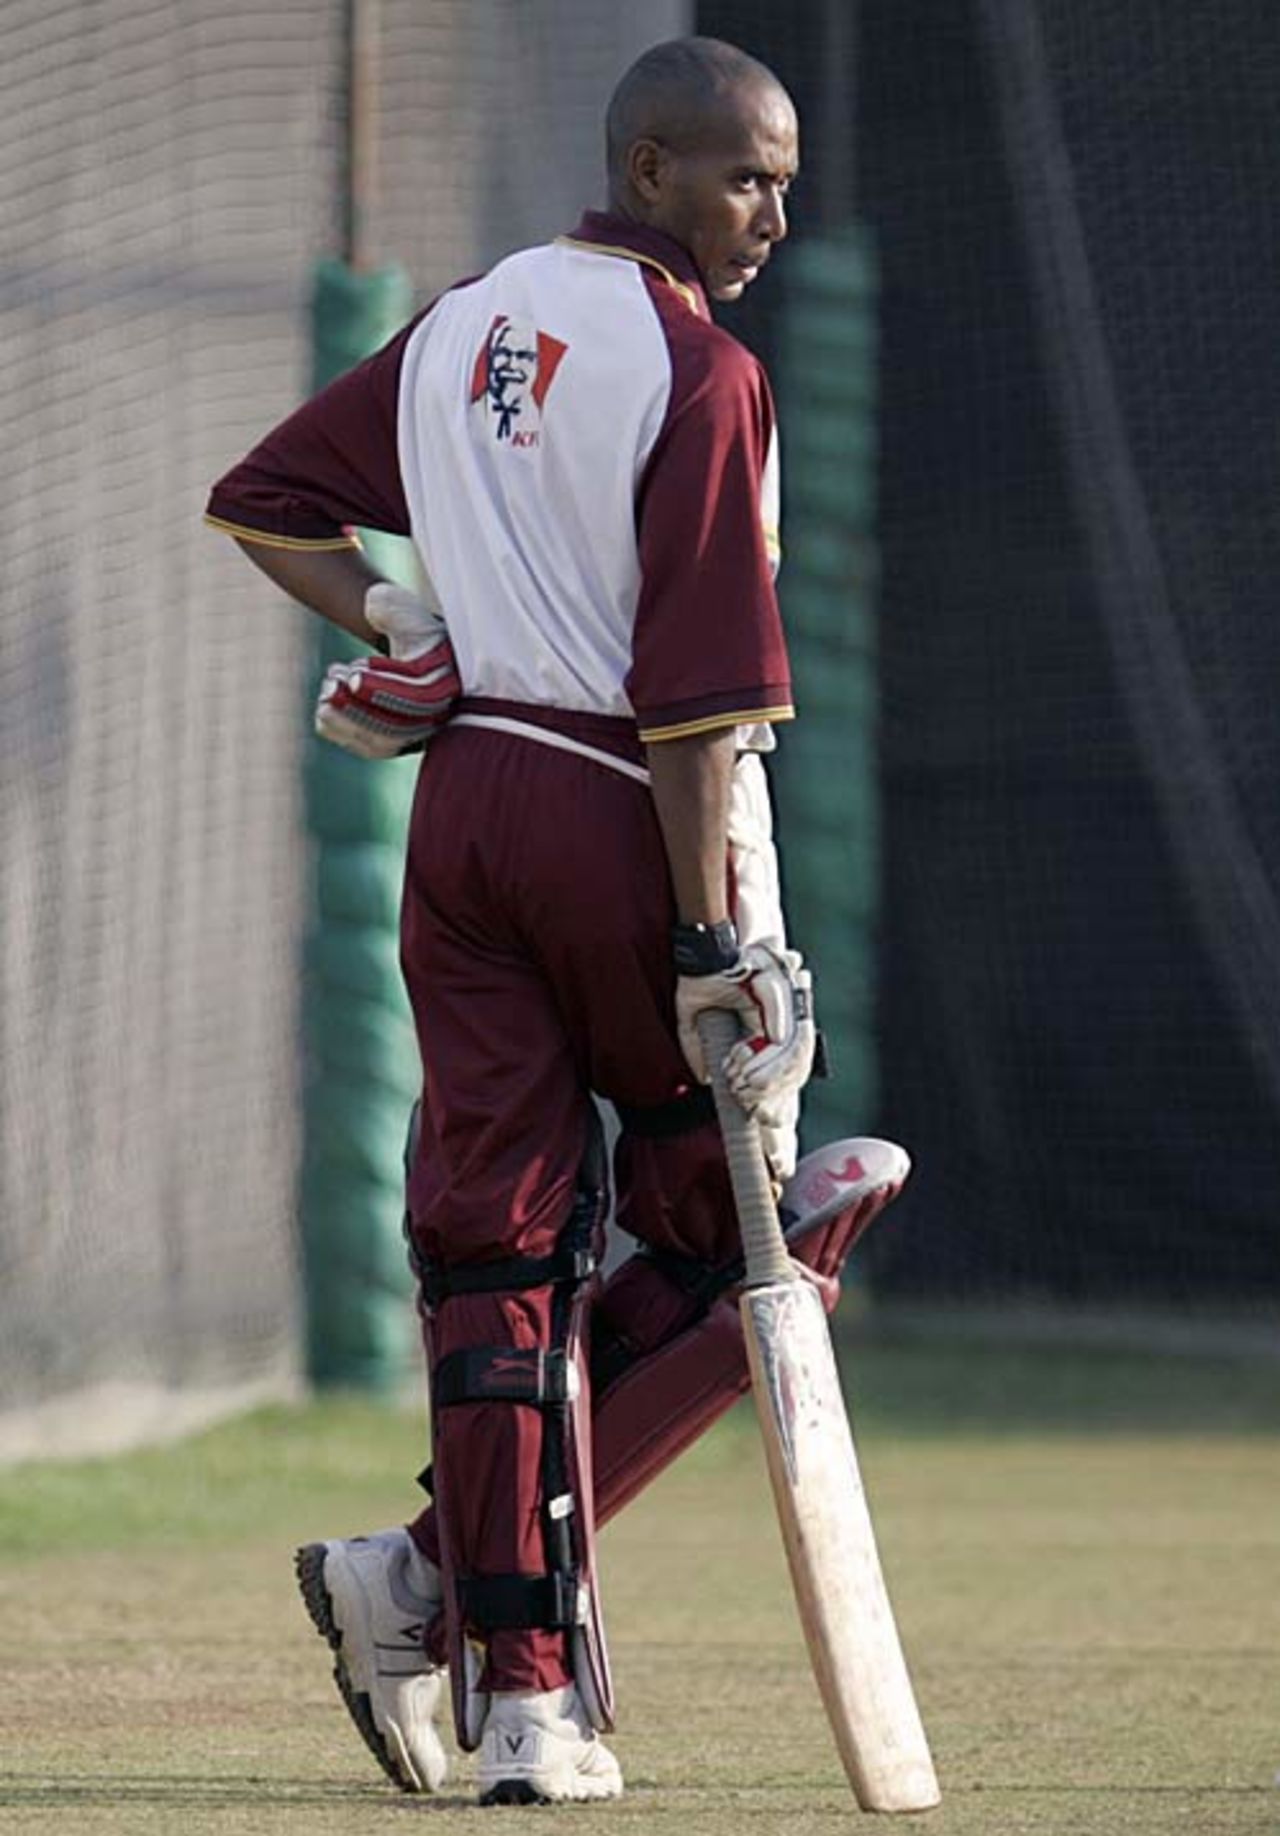 Ian Bradshaw takes a breather during a net session ahead of West Indies' match against England tomorrow, Ahmedabad, October 27, 2006